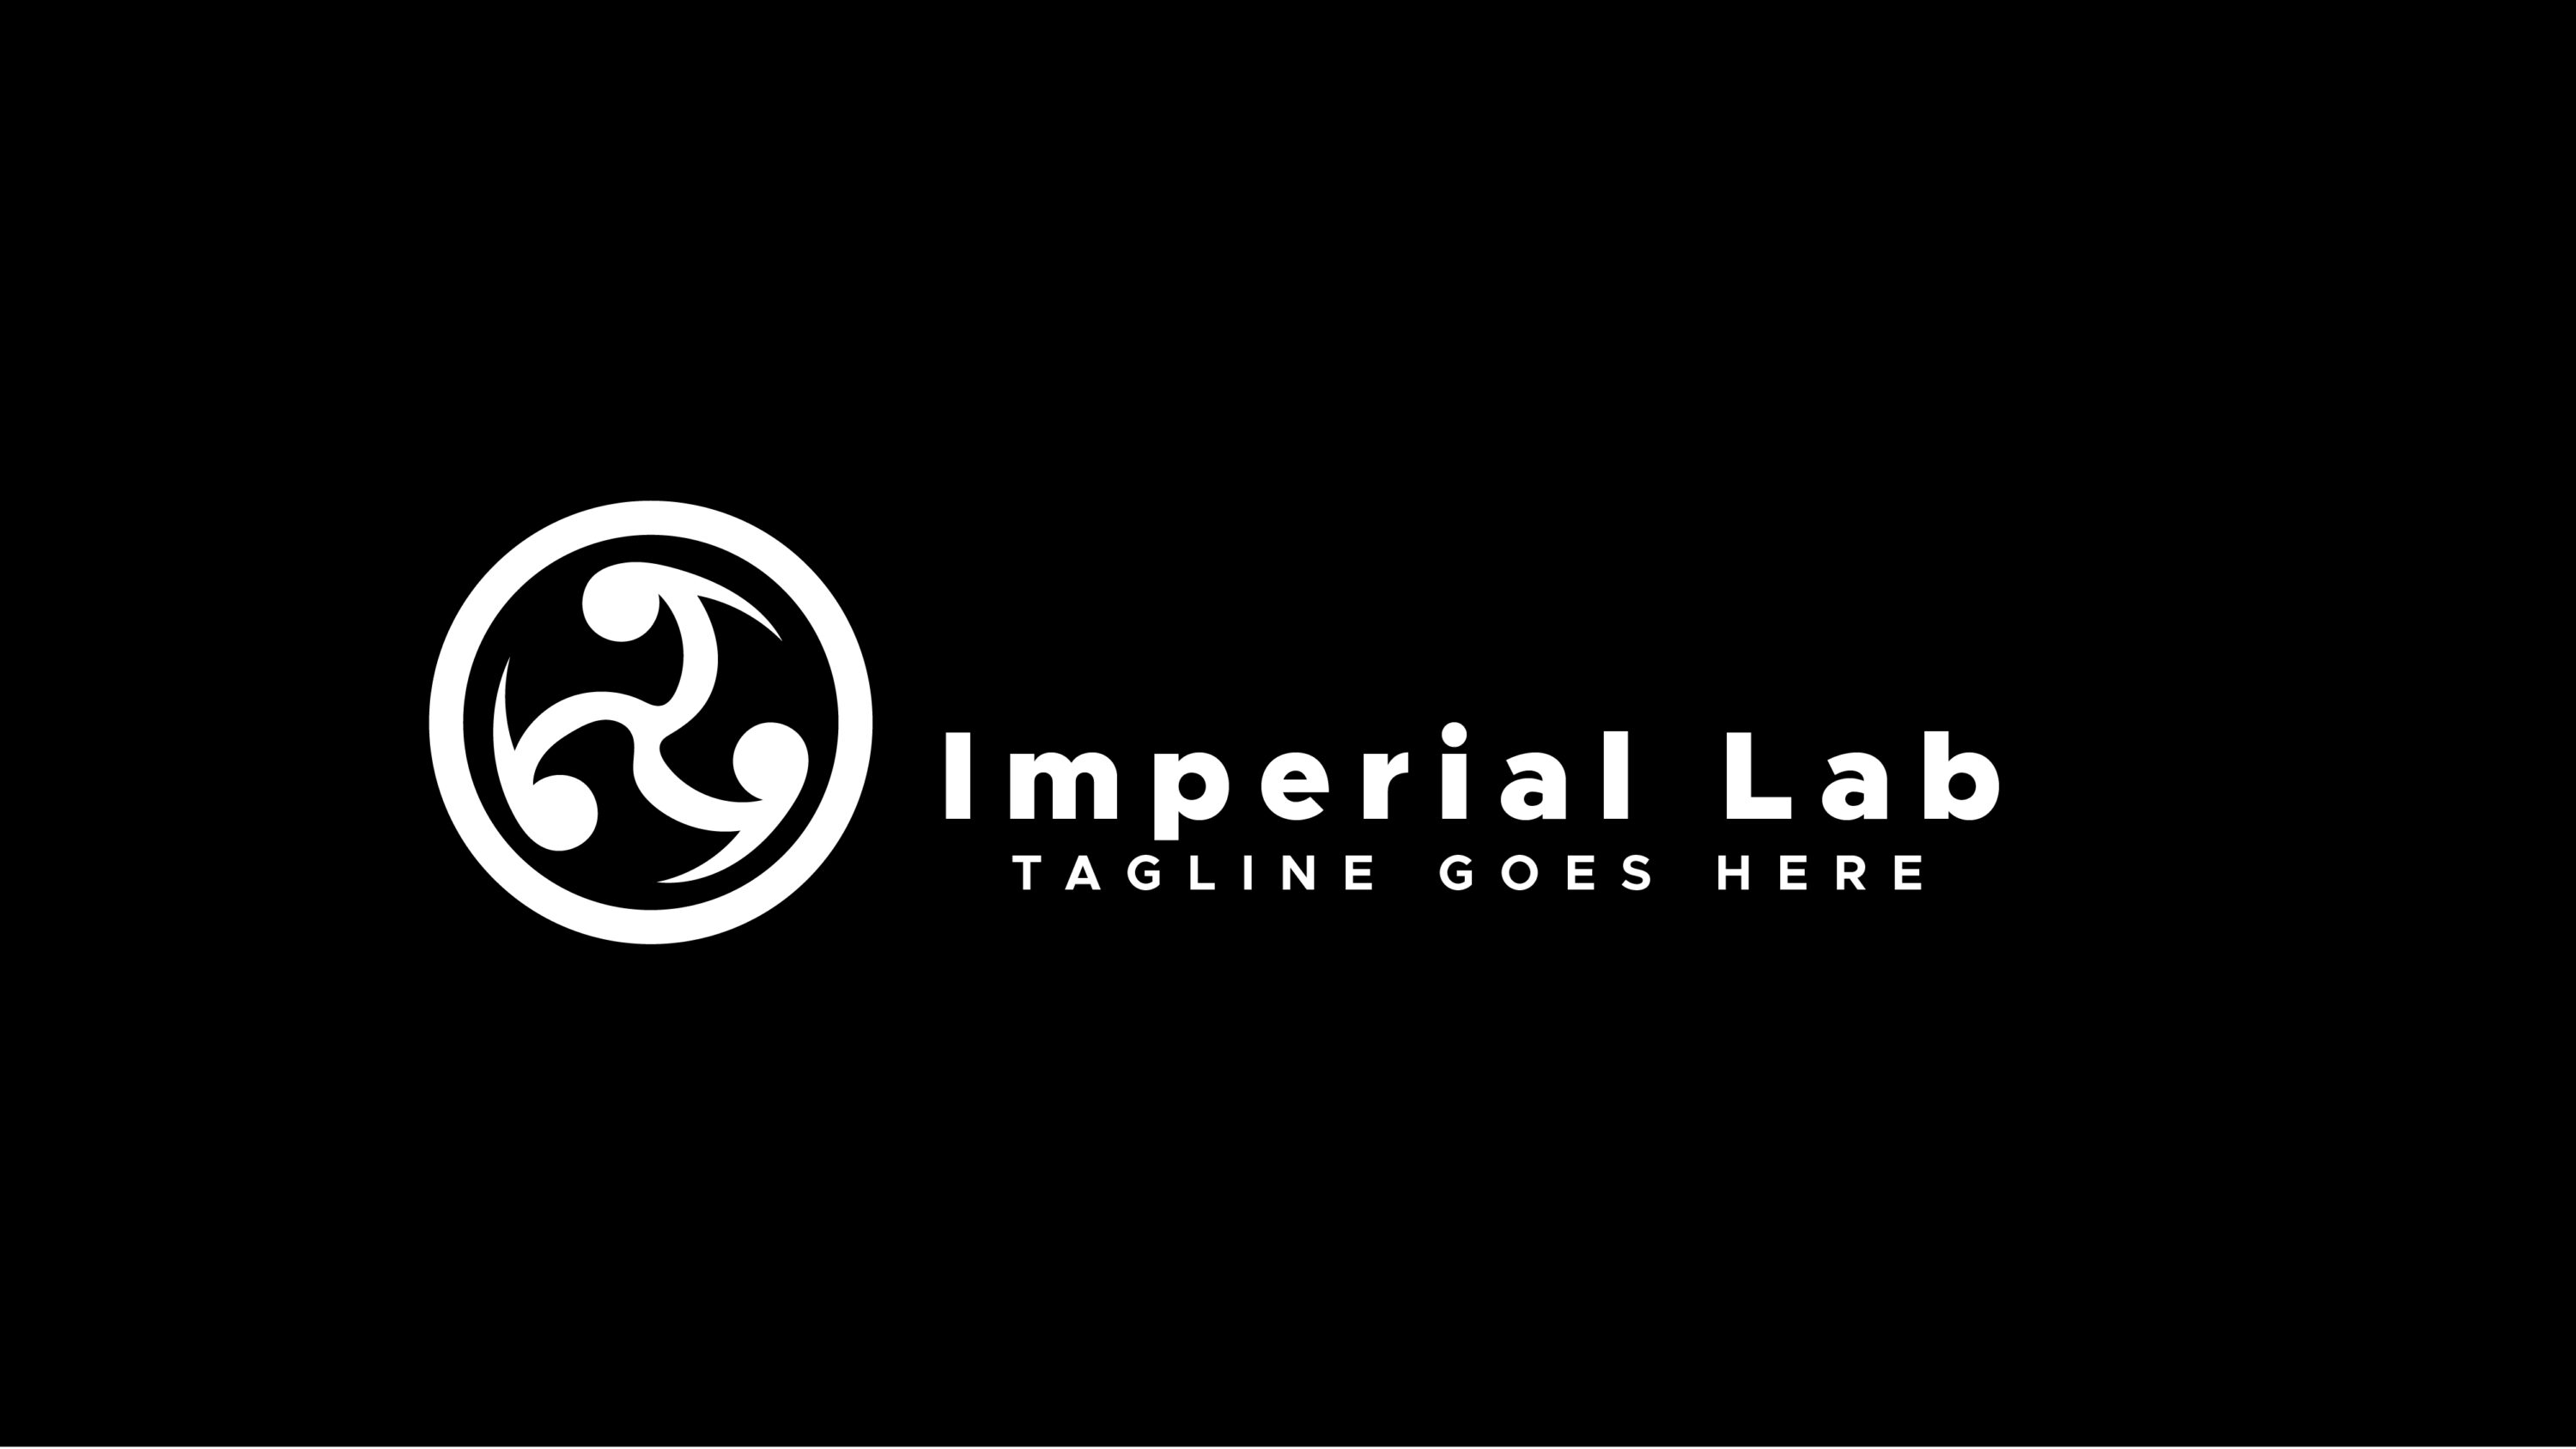 Imperial Lab Professional Logo Design Template Only 12$, white logo on black background.